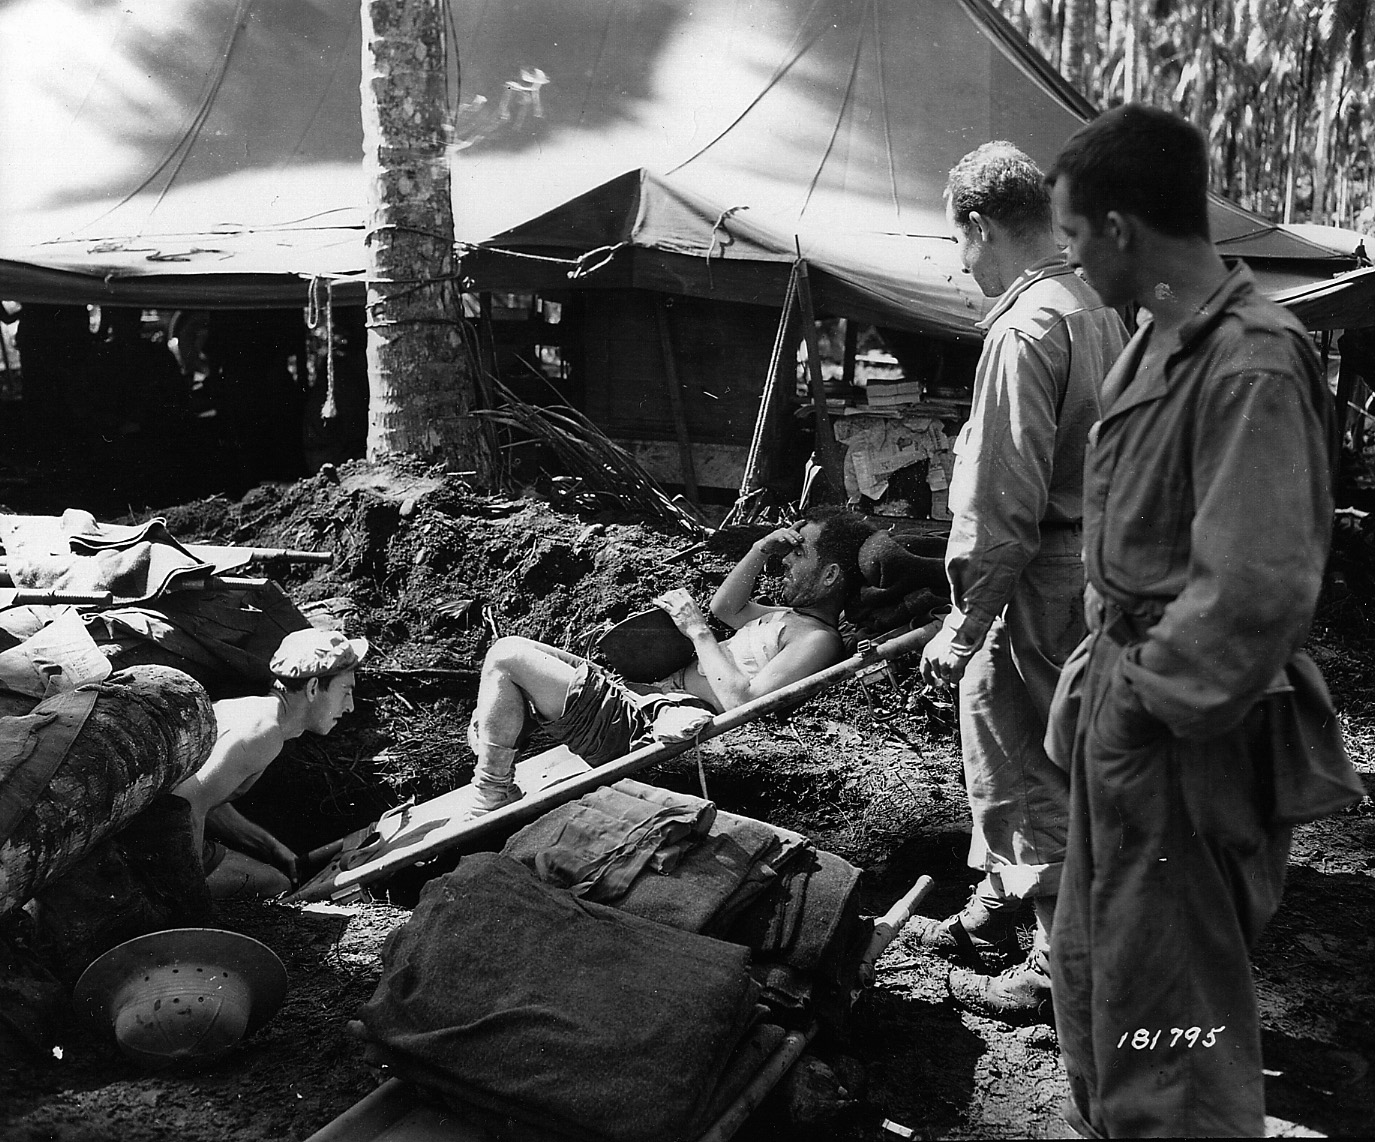 Wounded in action during Operation Cartwheel, a soldier of the 43rd Infantry Division is moved on a stretcher to the operating room at the division’s field hospital.  The advent of the field hospital in World War II saved the lives of many wounded American soldiers.